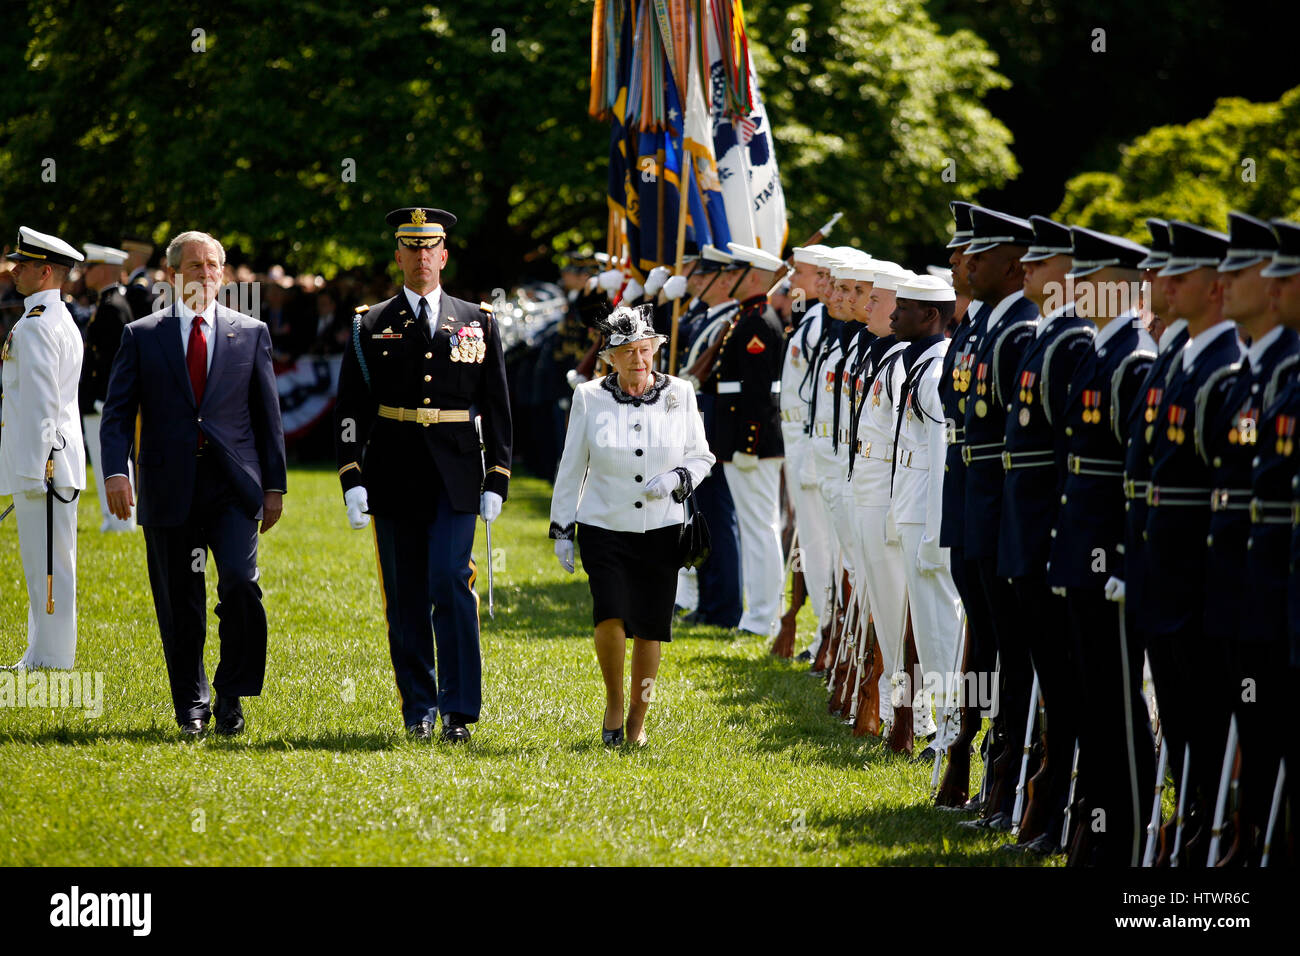 Washington, D.C - May 7, 2007 -- Queen Elizabeth II of the United Kingdom reviews the troops with President George W Bush as part of a South Lawn ceremony during her State Visit to the White House, Monday, in Washington, DC, May 7, 2007.. Stock Photo